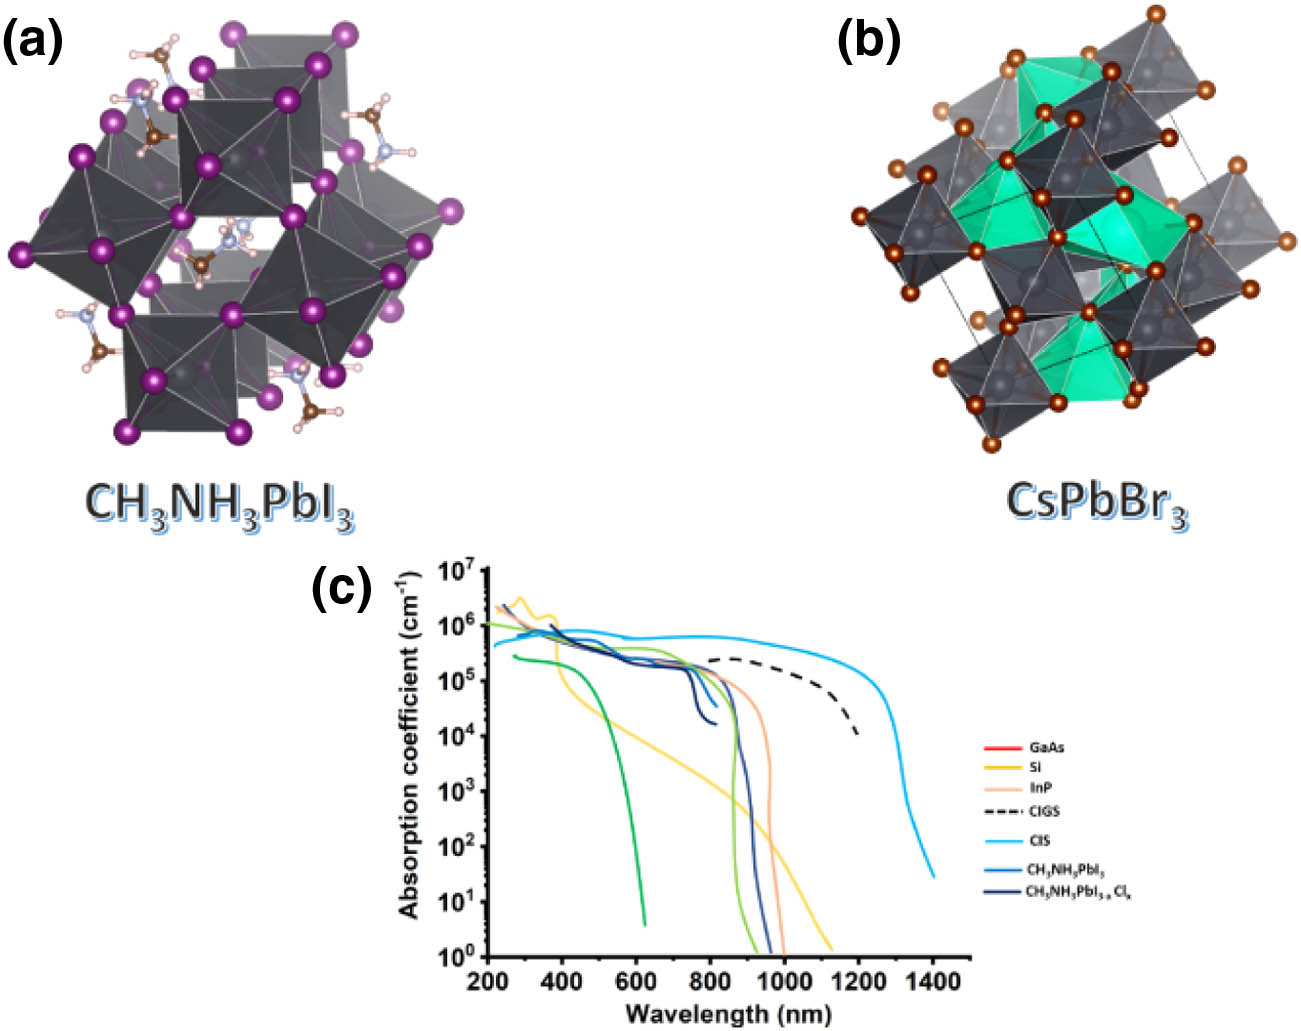 (a), (b) Schematic crystal structure of representative perovskite materials CH3NH3PbI3 and CsPbBr3, simulated from Vesta.3 Software; (c) comparative optical absorption behavior of semiconducting materials. Reproduced from Ref. [6] with permission. Copyright 2014, Springer Nature.